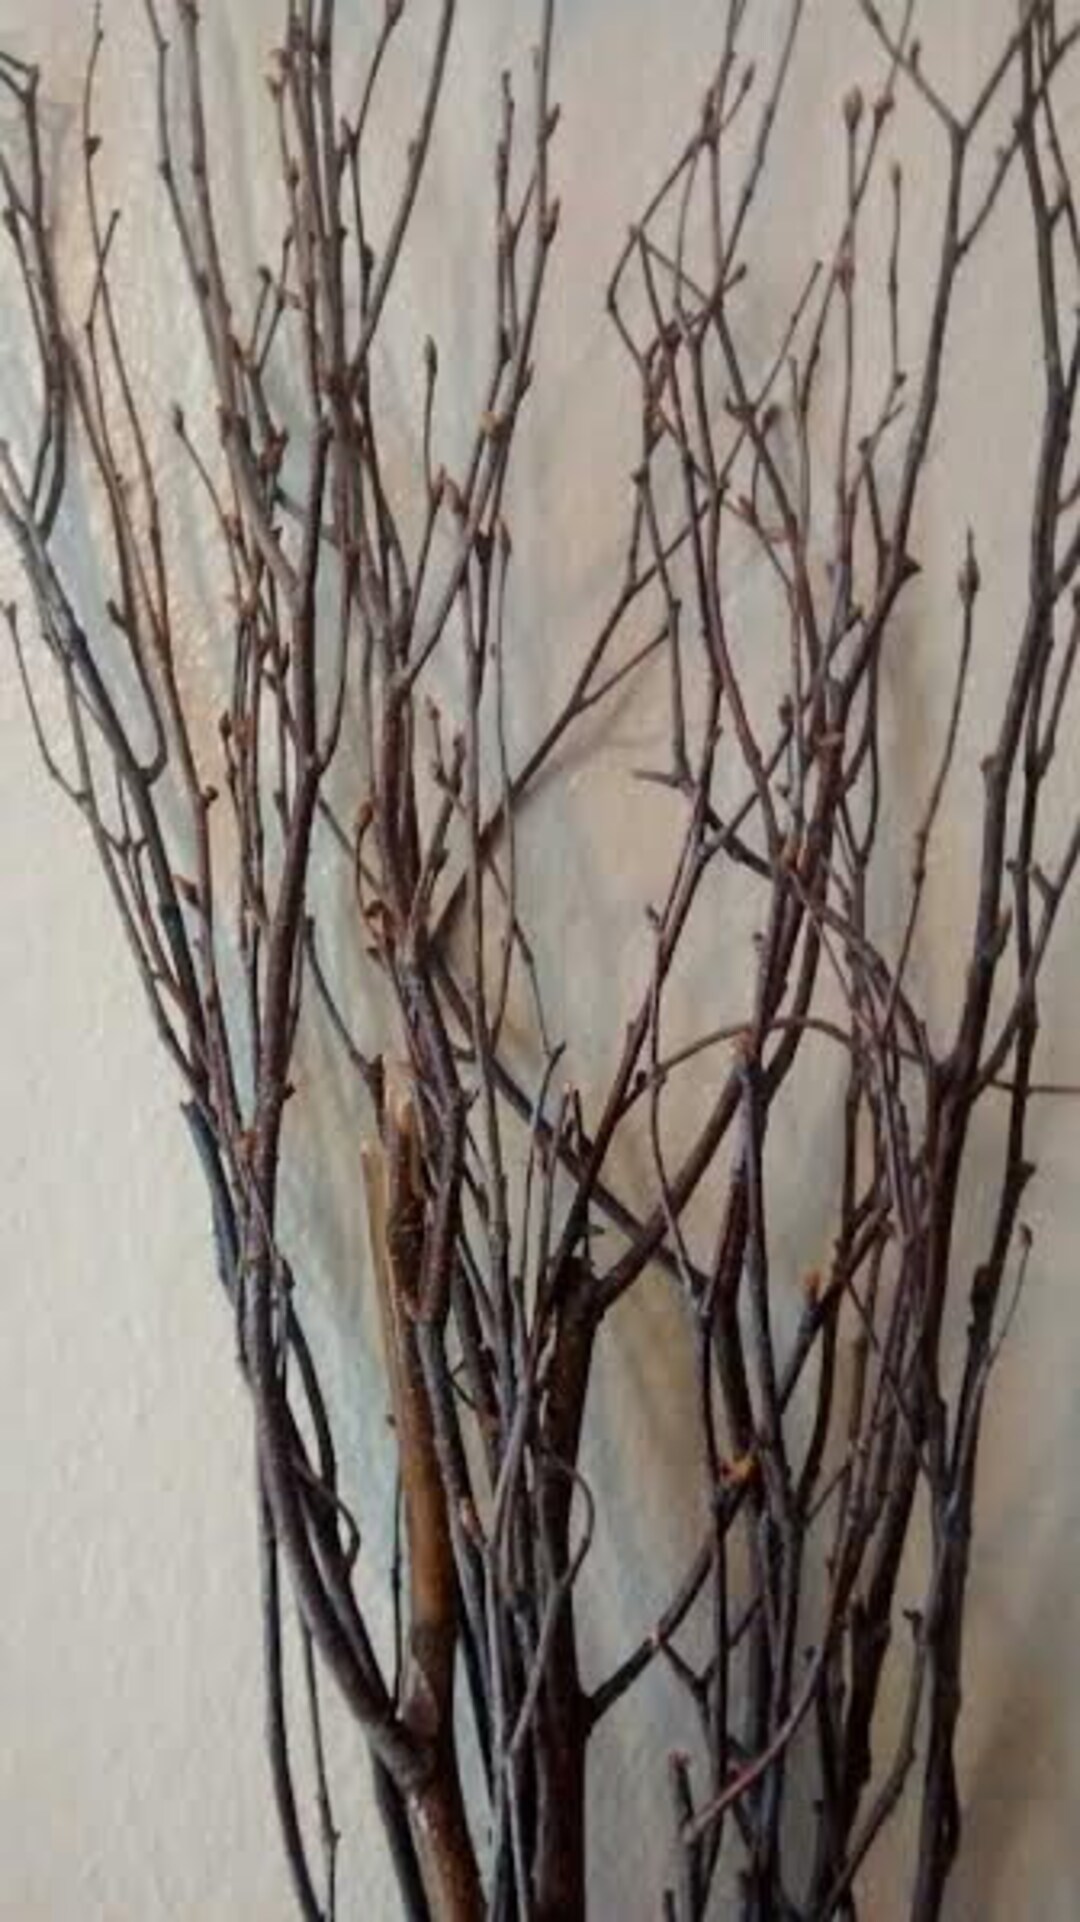 Birch Branches/ Twigs 25- 3' to 4 ft tall – Spirit of the Woods, Inc